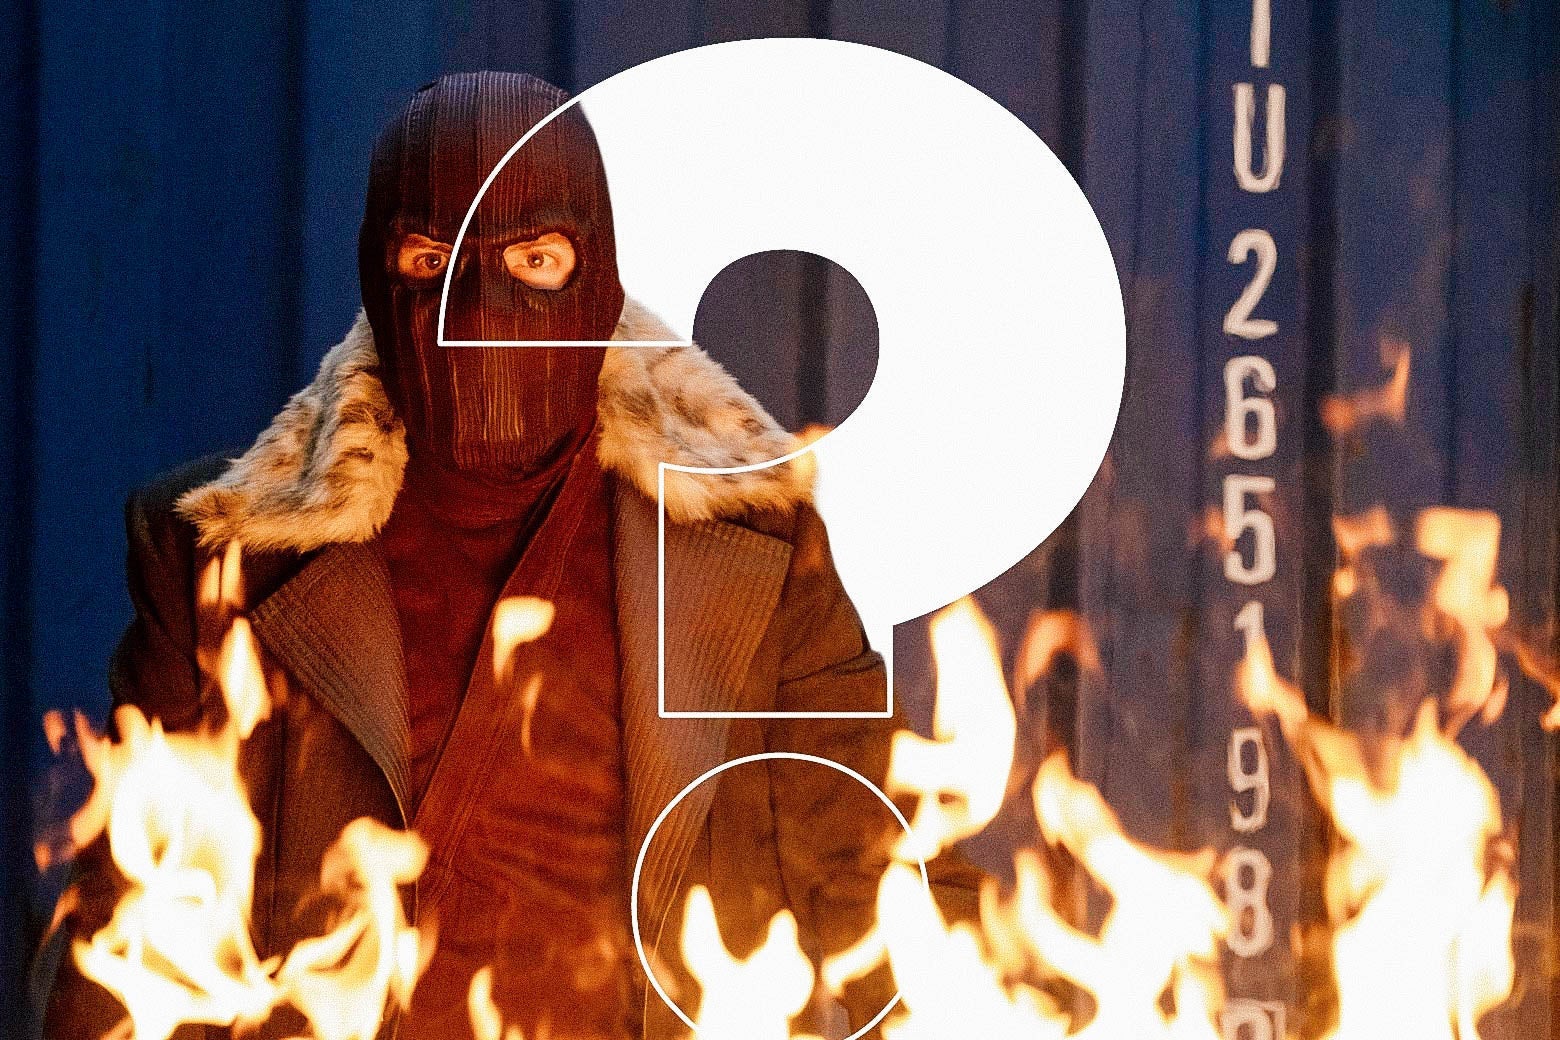 A masked white man in a heavy coat stands as a fire blazes in front of him. Over the image, a giant question mark.